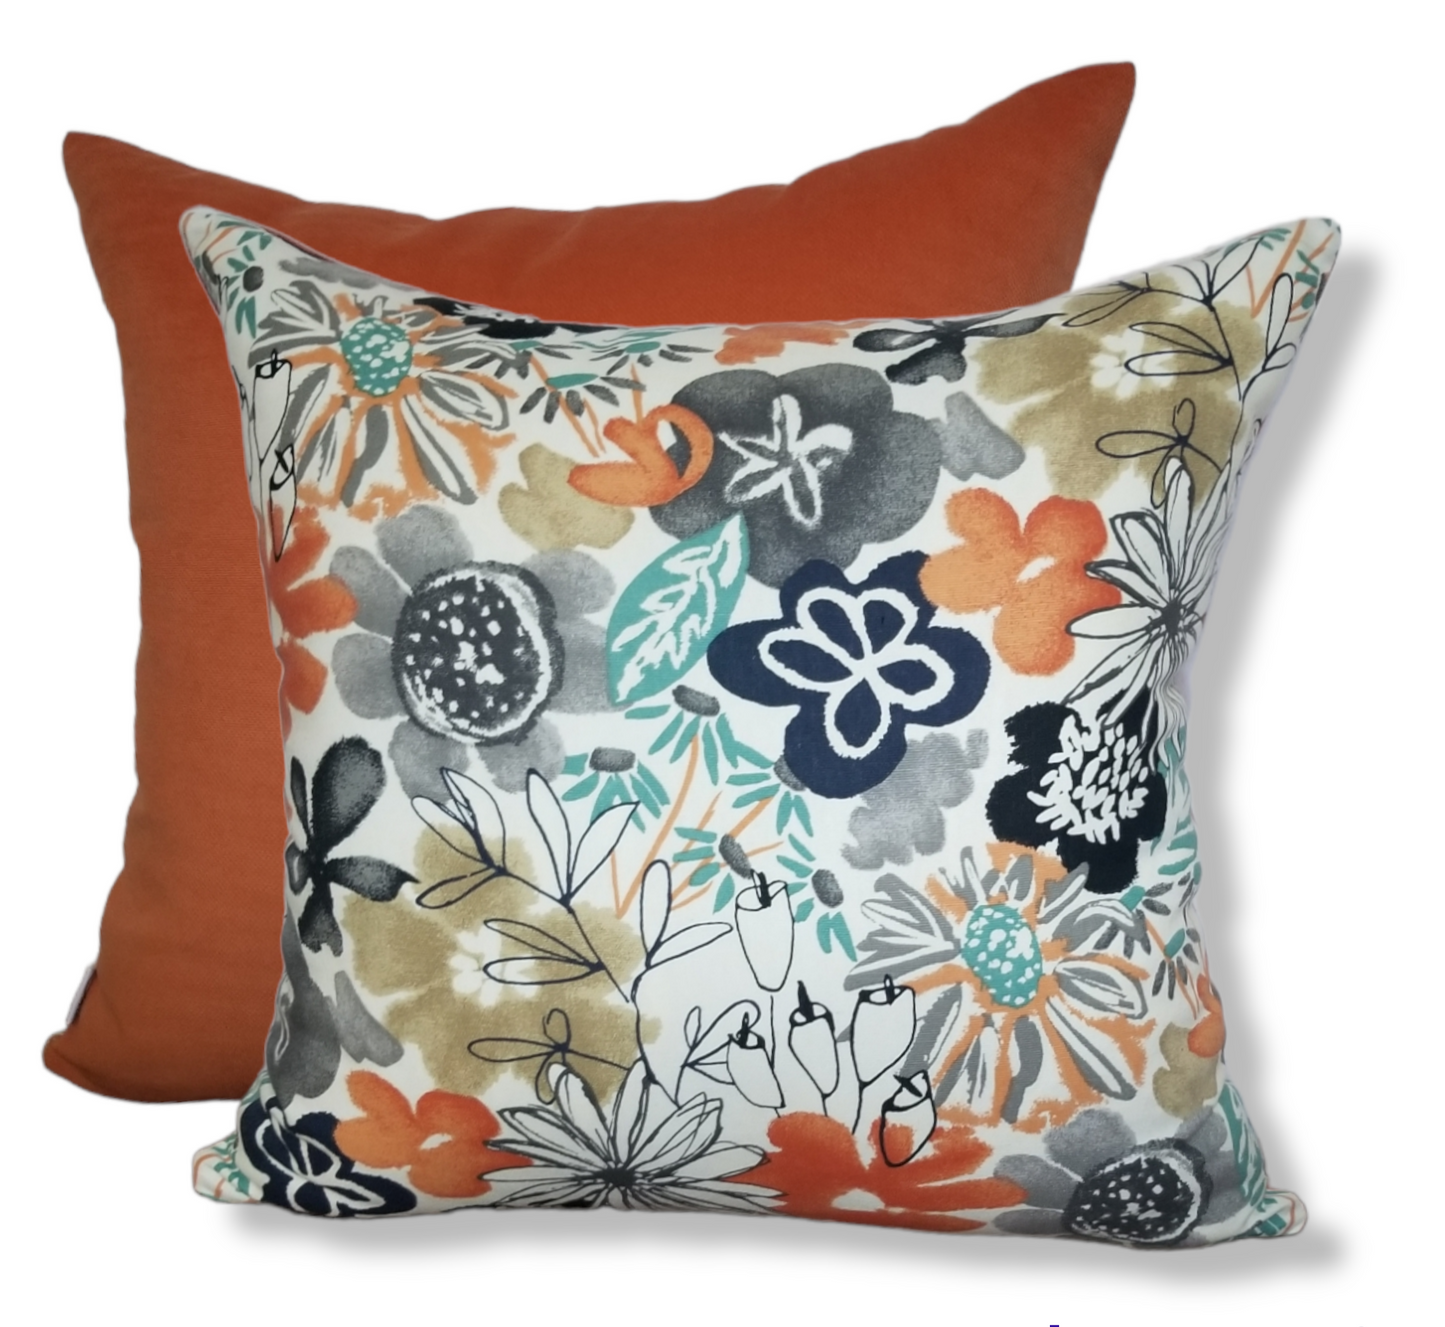 This vibrant yet relaxing designer accent pillow boasting colors such as teal, black, grey and orange.  perfect for your bedroom, livingroom or foyer.